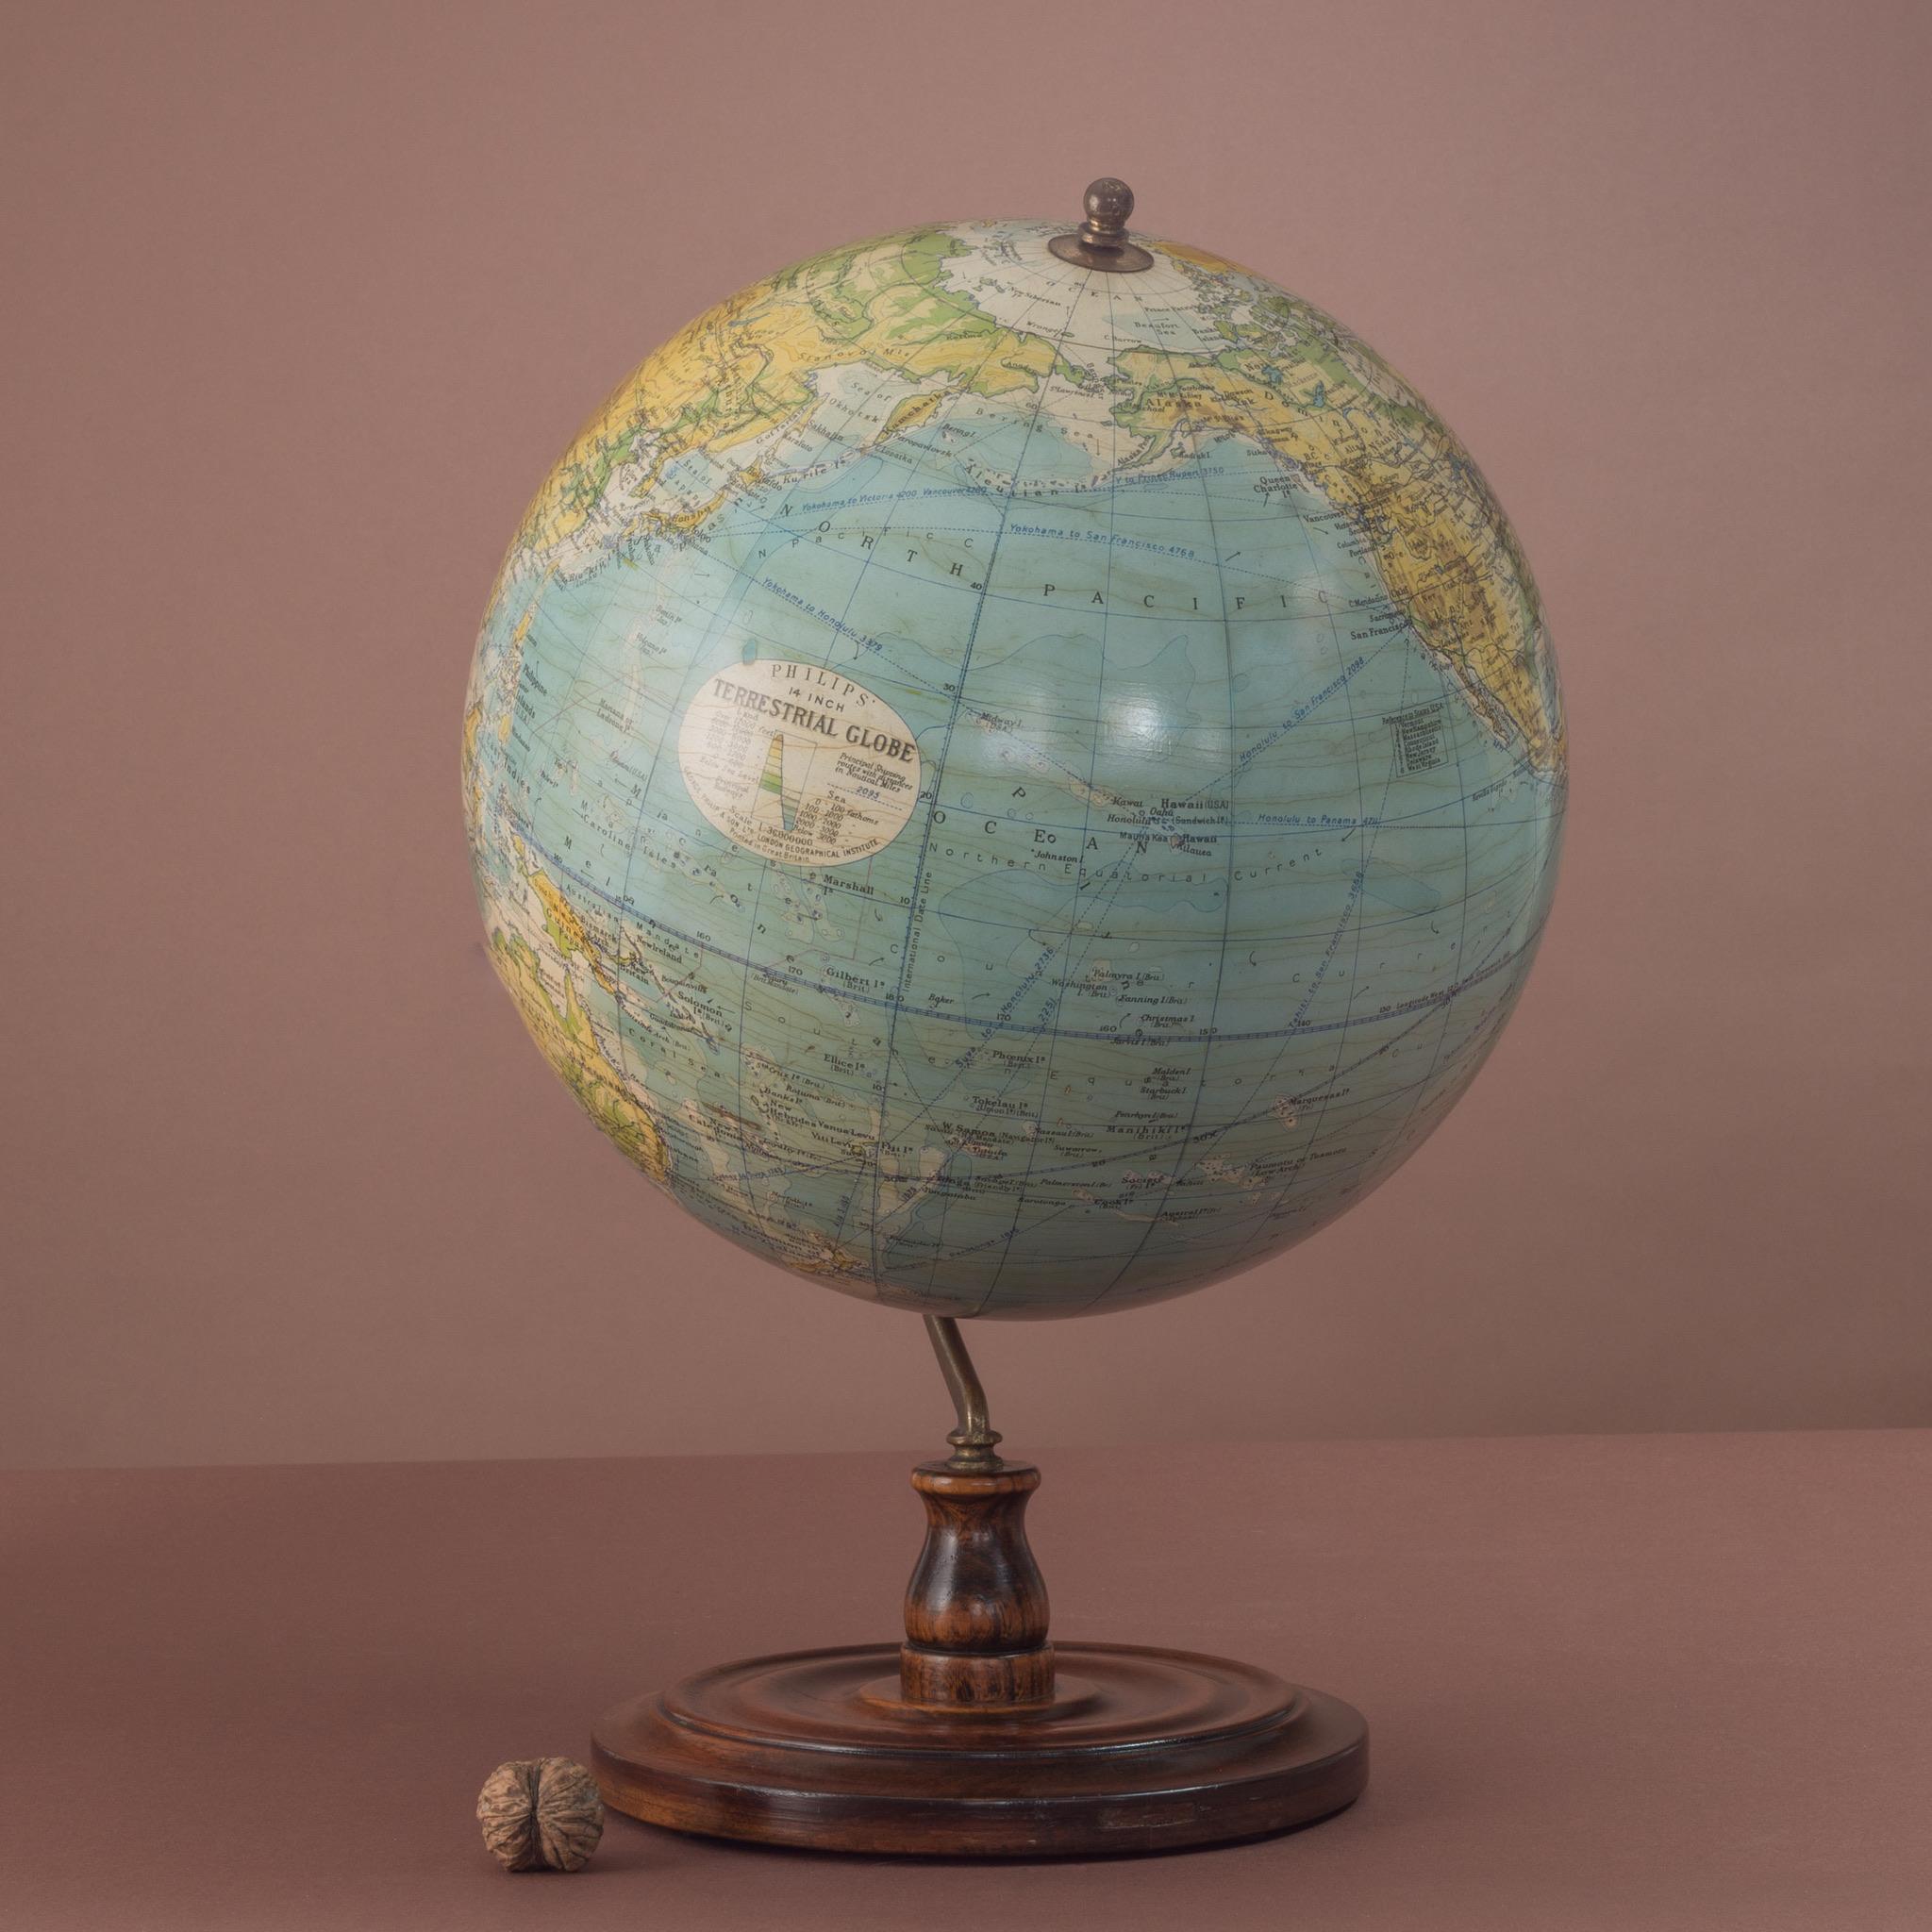 A substantial 14 inch gesso terrestrial globe by Philips of London on brass inclined plain mount attached to original turned wooden based upright with axes secured at the top by a brass finial. Has Air Ministry stamp on the underside of the base.